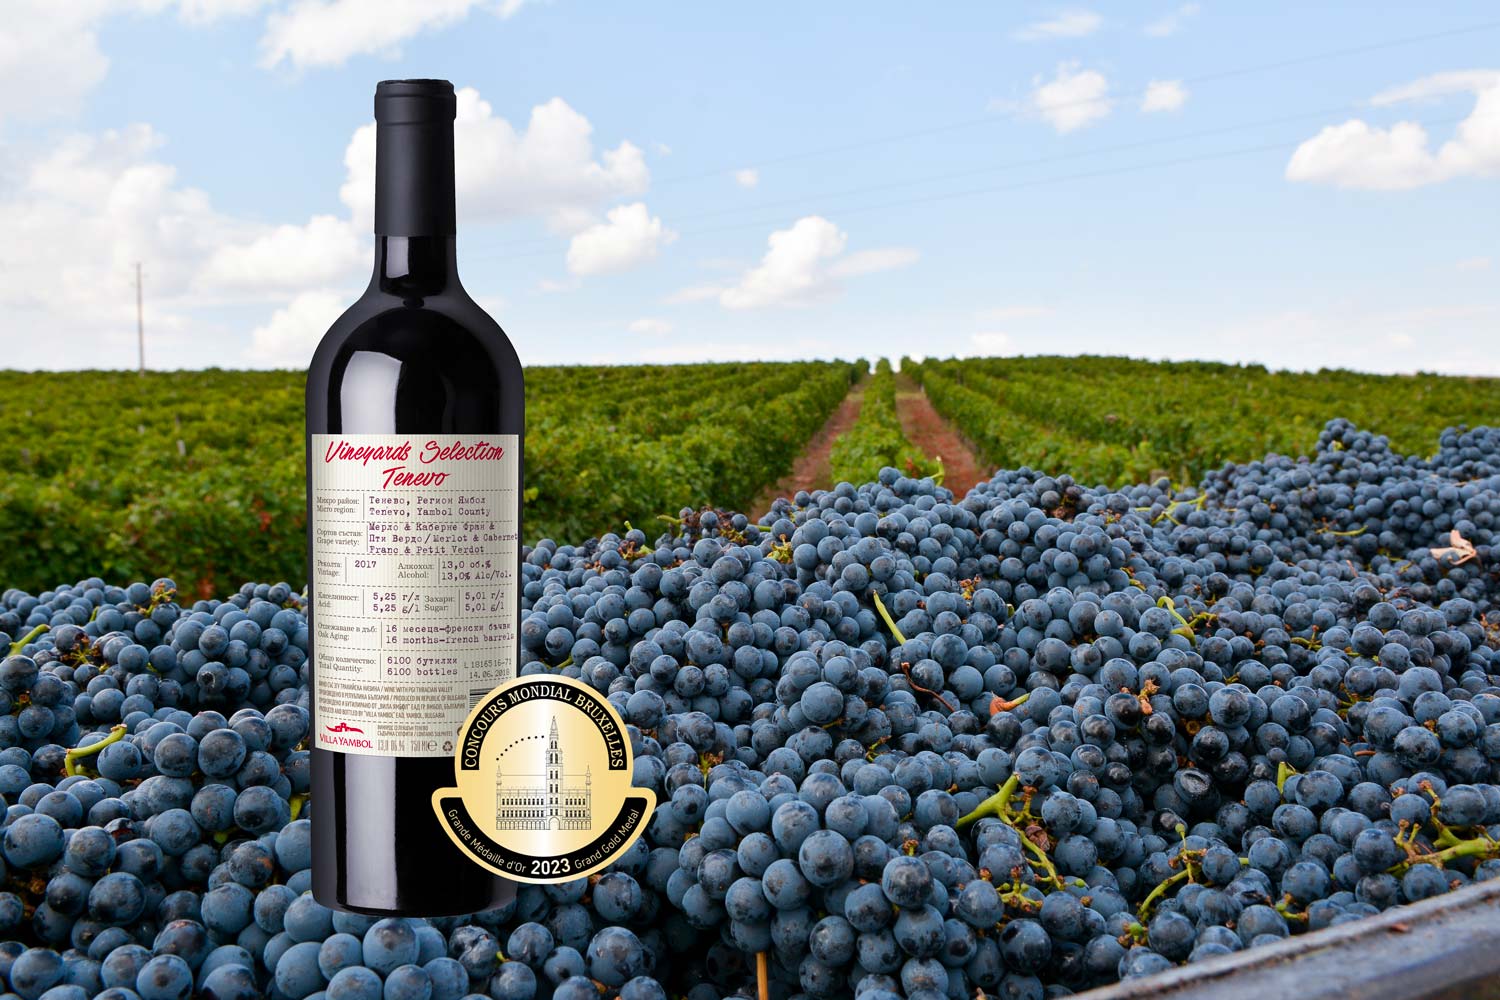 The Bulgarian Vineyards Selection Tenevo 2017 is this year’s International Revelation Red Wine at CMB